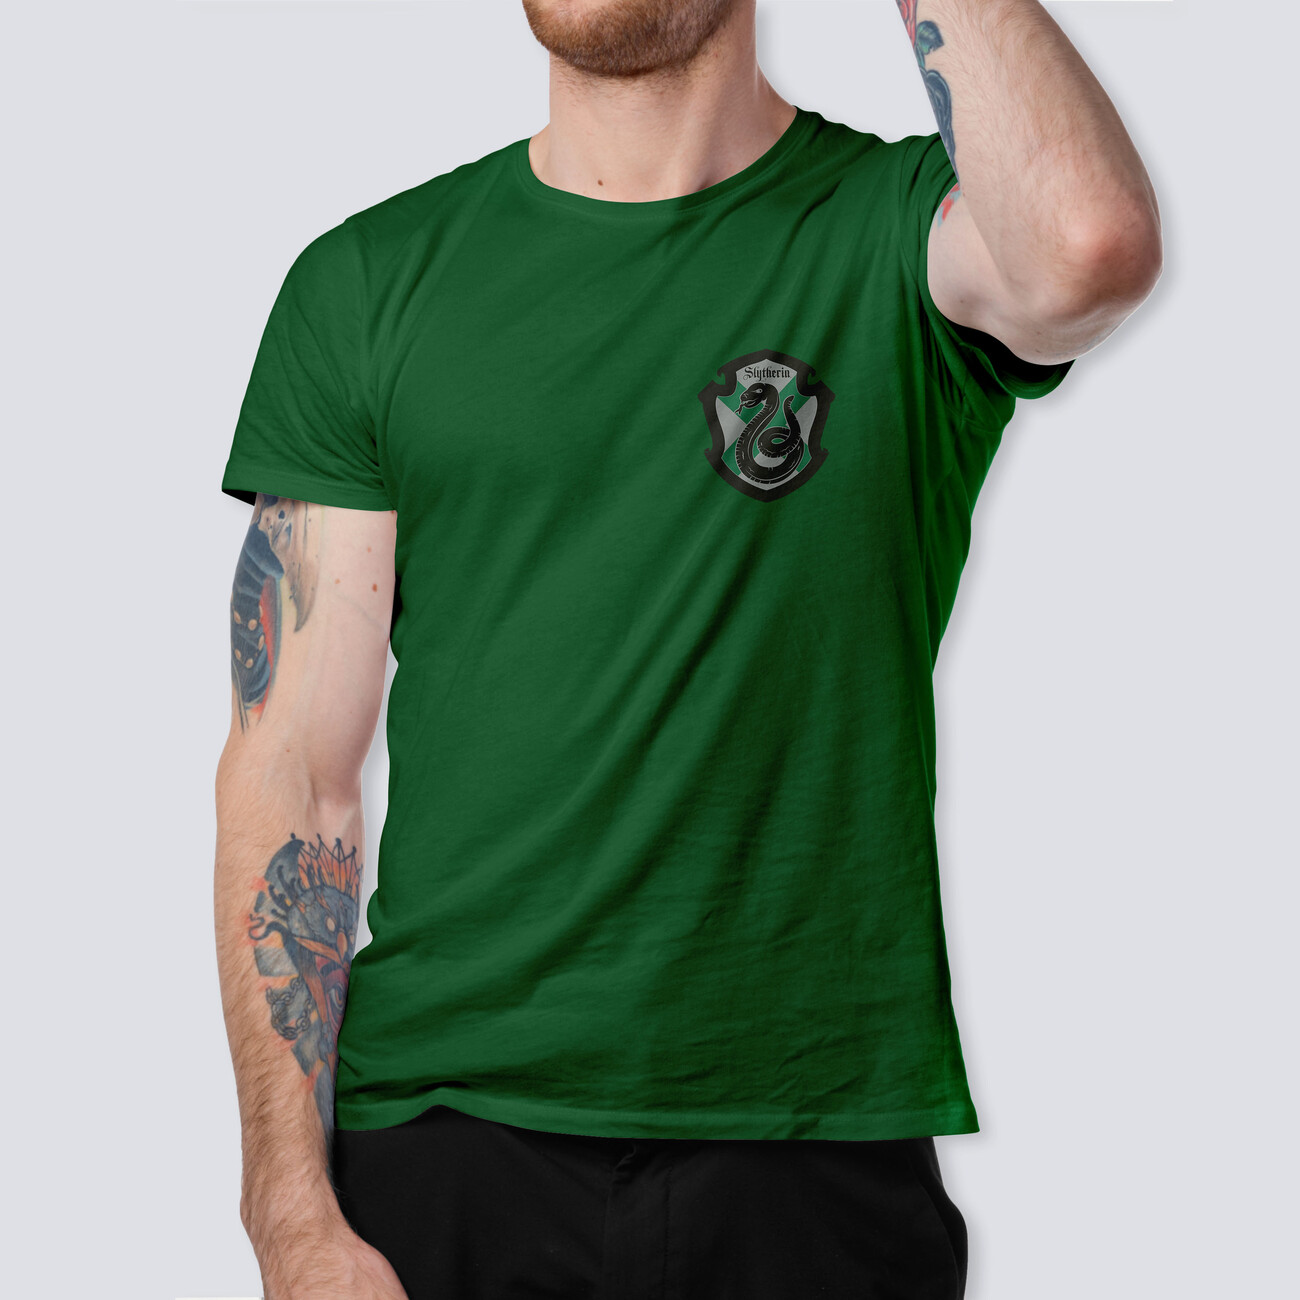 Harry Potter - Slytherin Logo and merchandise for accessories 07 fans | Clothes